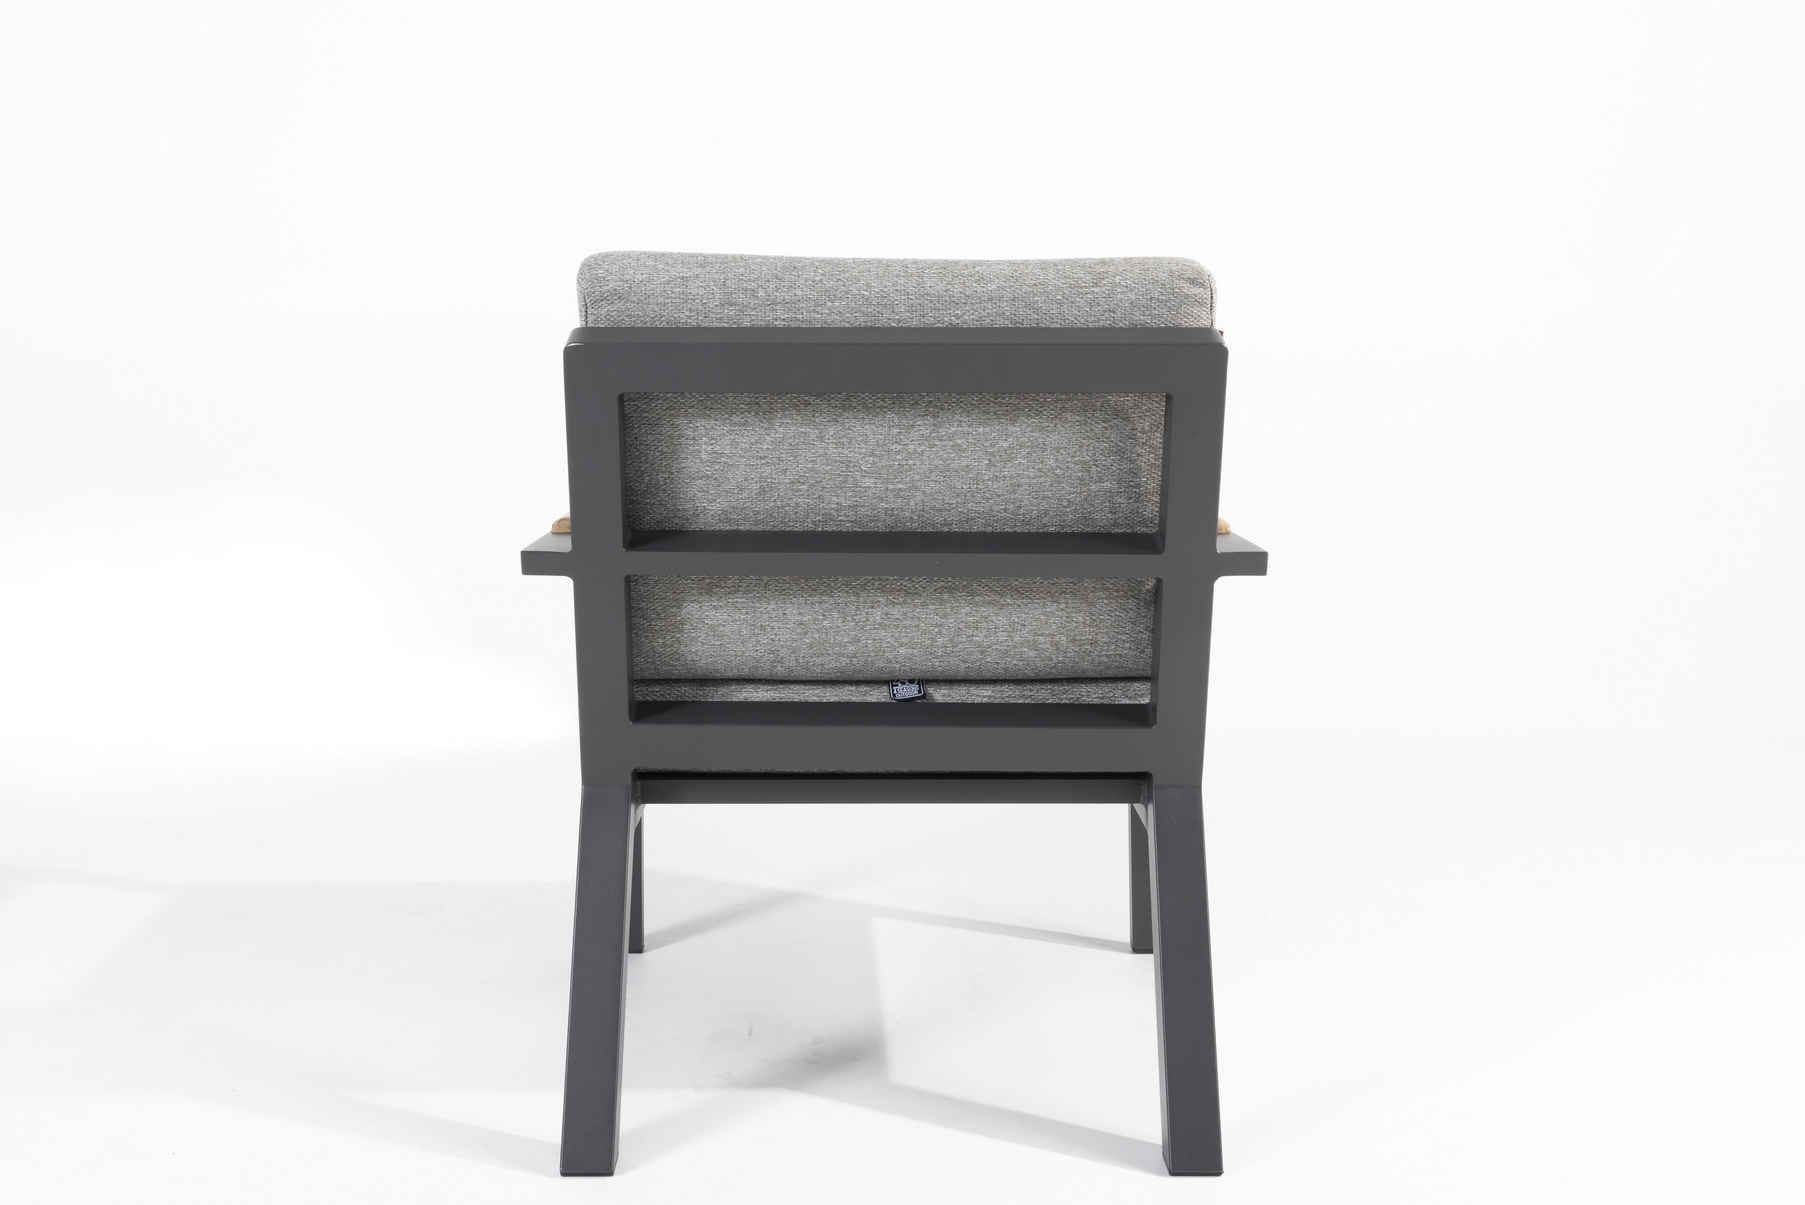 19865__Proton_low_dining_chair_detail_05.jpg